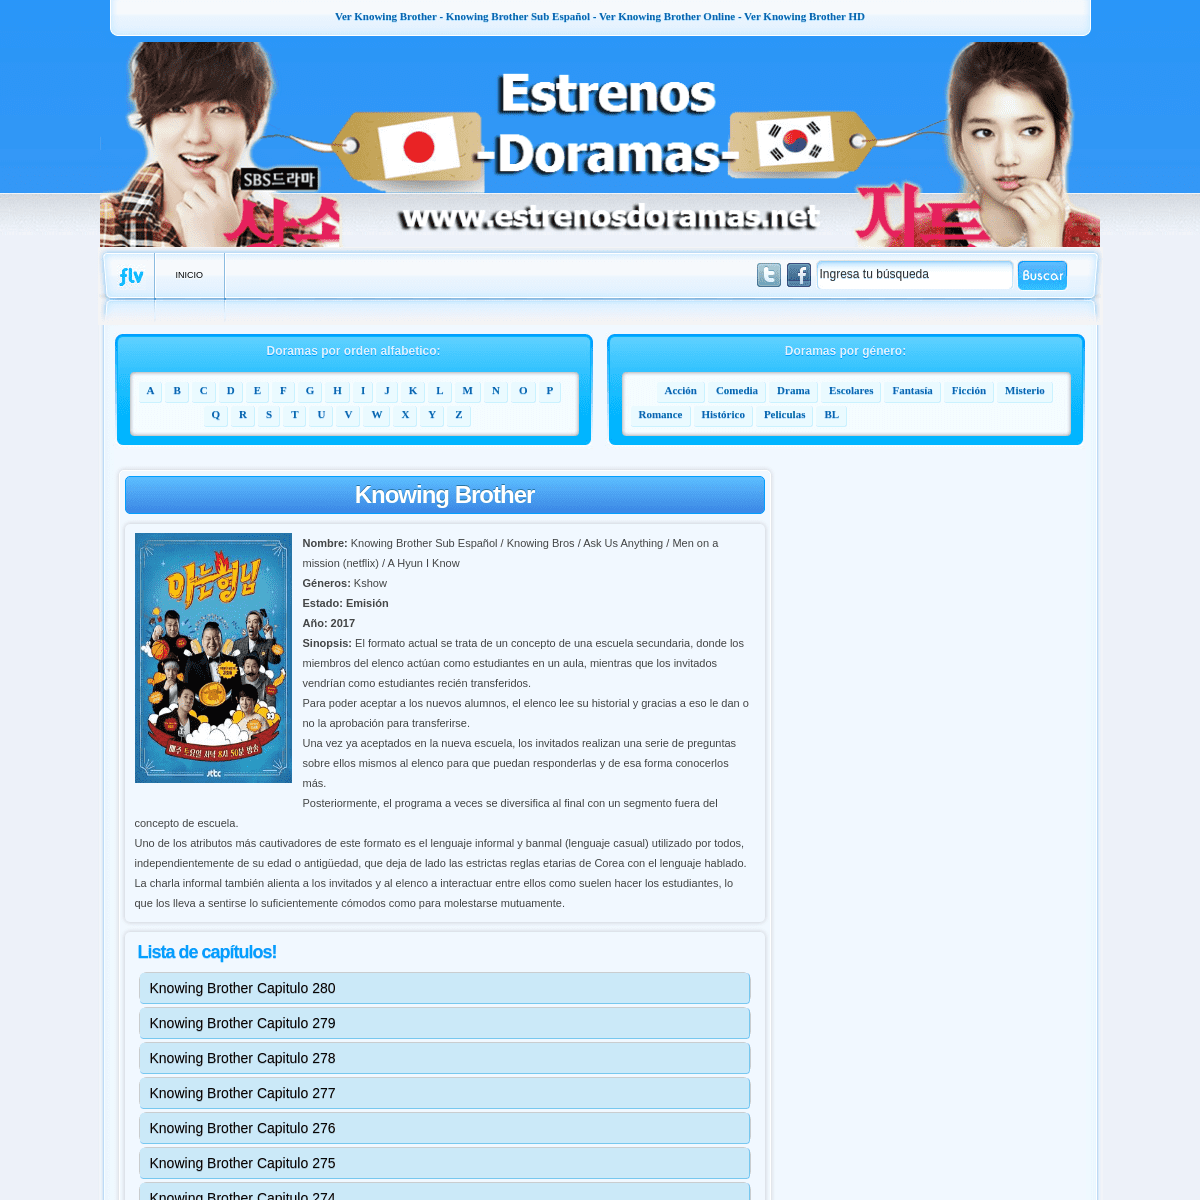 A complete backup of https://www23.estrenosdoramas.net/2018/05/knowing-brother.html